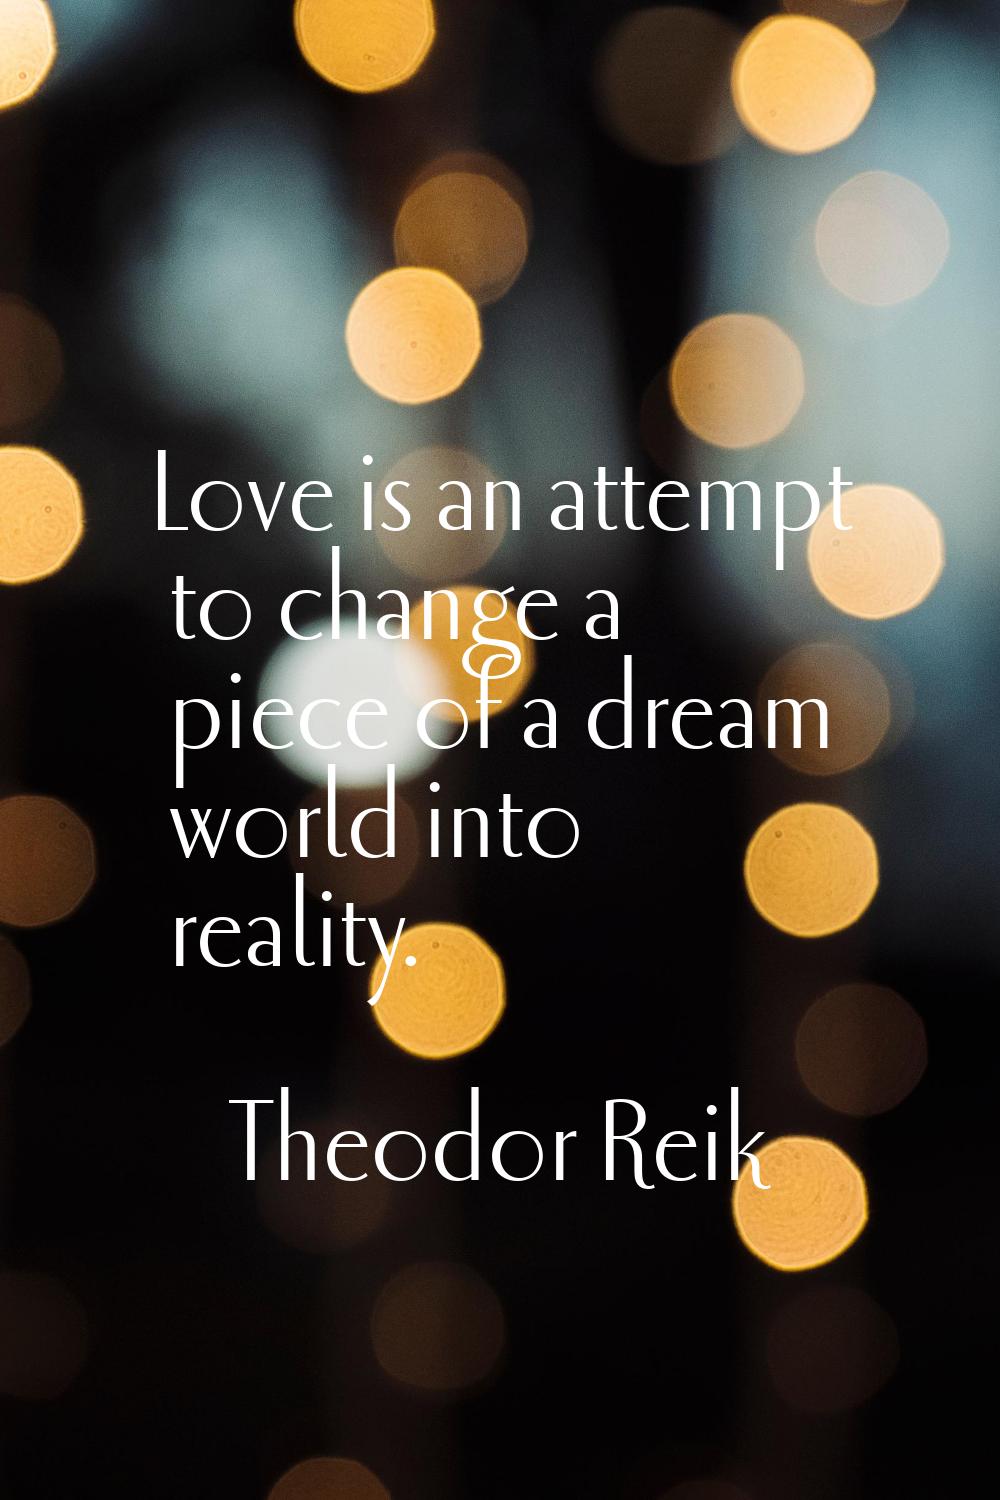 Love is an attempt to change a piece of a dream world into reality.